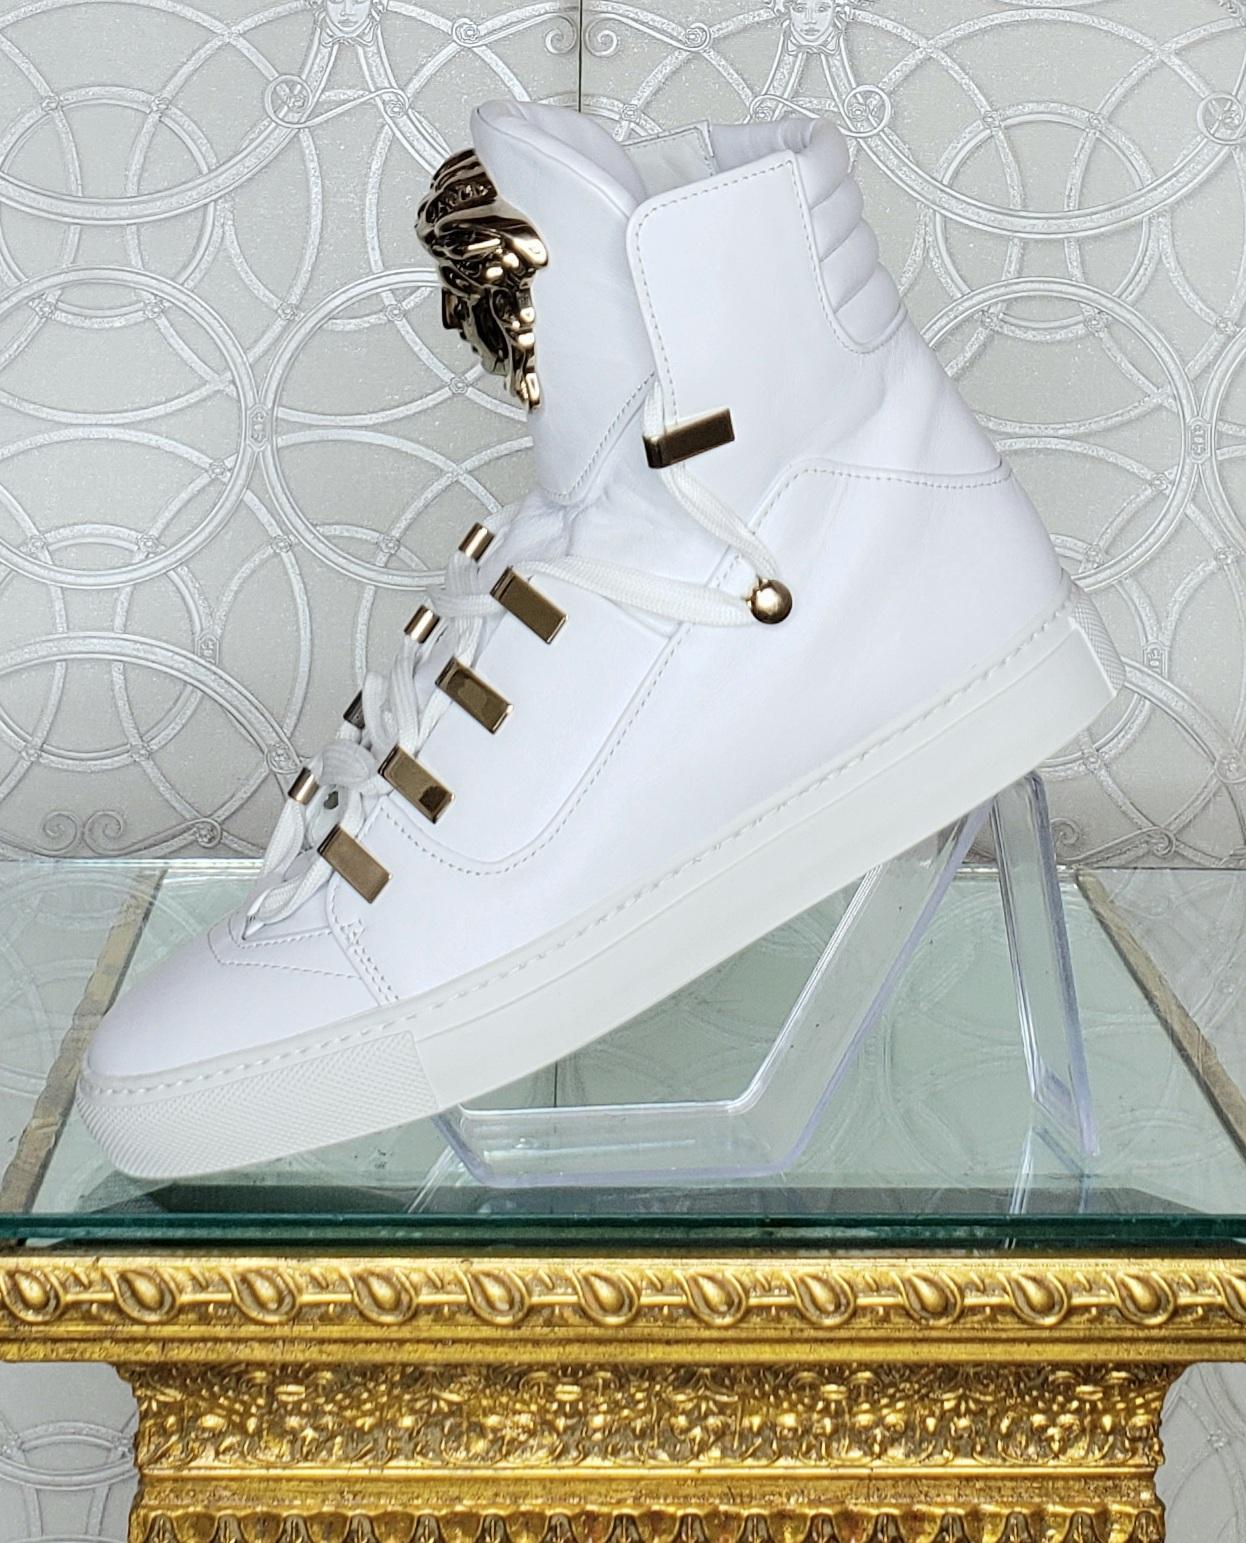 VERSACE

White Sneakers
White  leather, pin detail

3D MEDUSA

Leather lining
Rubber sole

Italian size is  38 - US 8

Comes with Versace box and authenticity card.

 100% authentic guarantee 

PLEASE VISIT OUR STORE FOR MORE GREAT ITEMS 